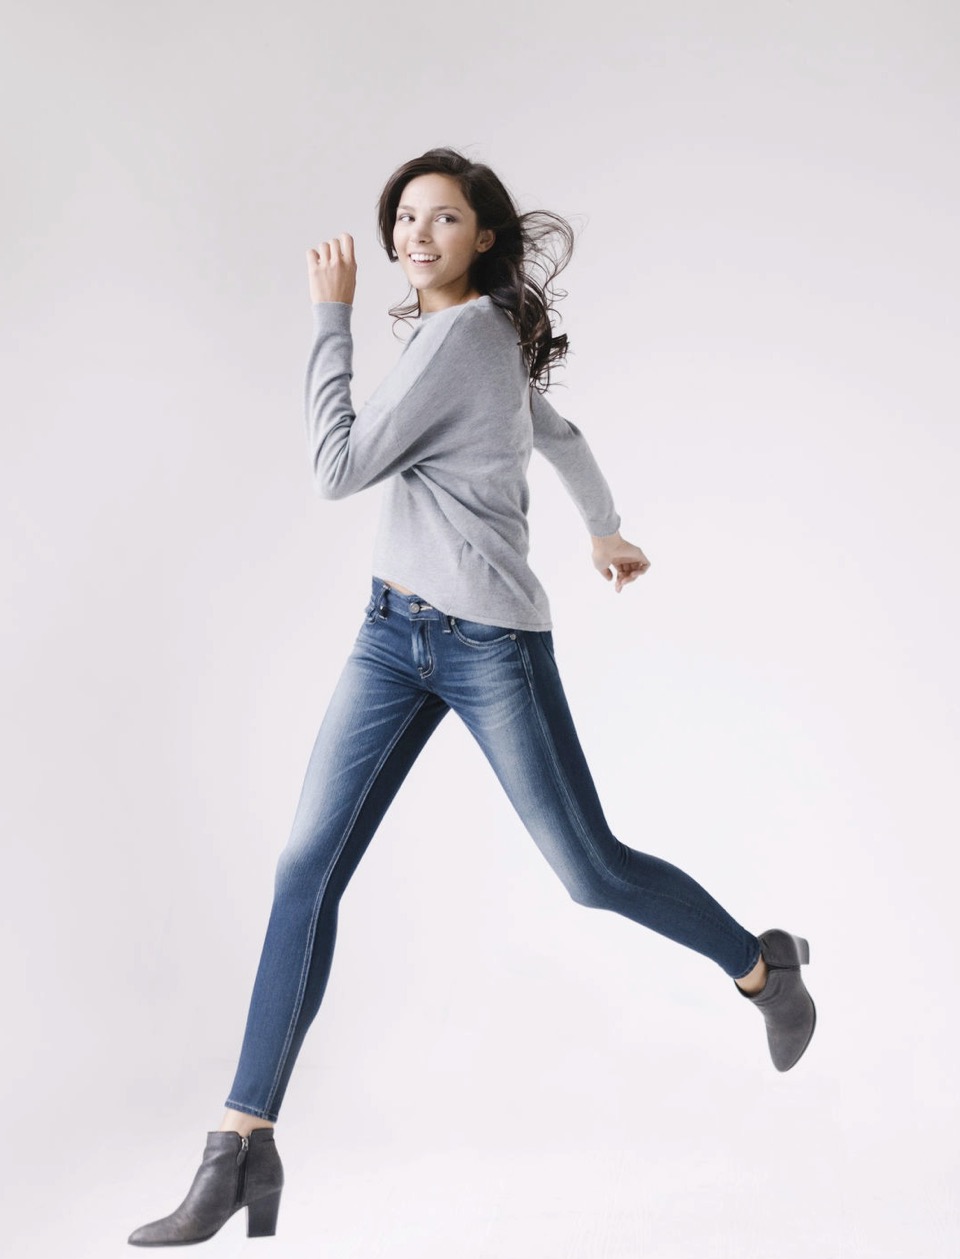 Fabrics made with Invista’s new knit denim technology can qualify for different Lycra brands. Shown here are everyday jeans made with the Lycra brand. ©  Invista